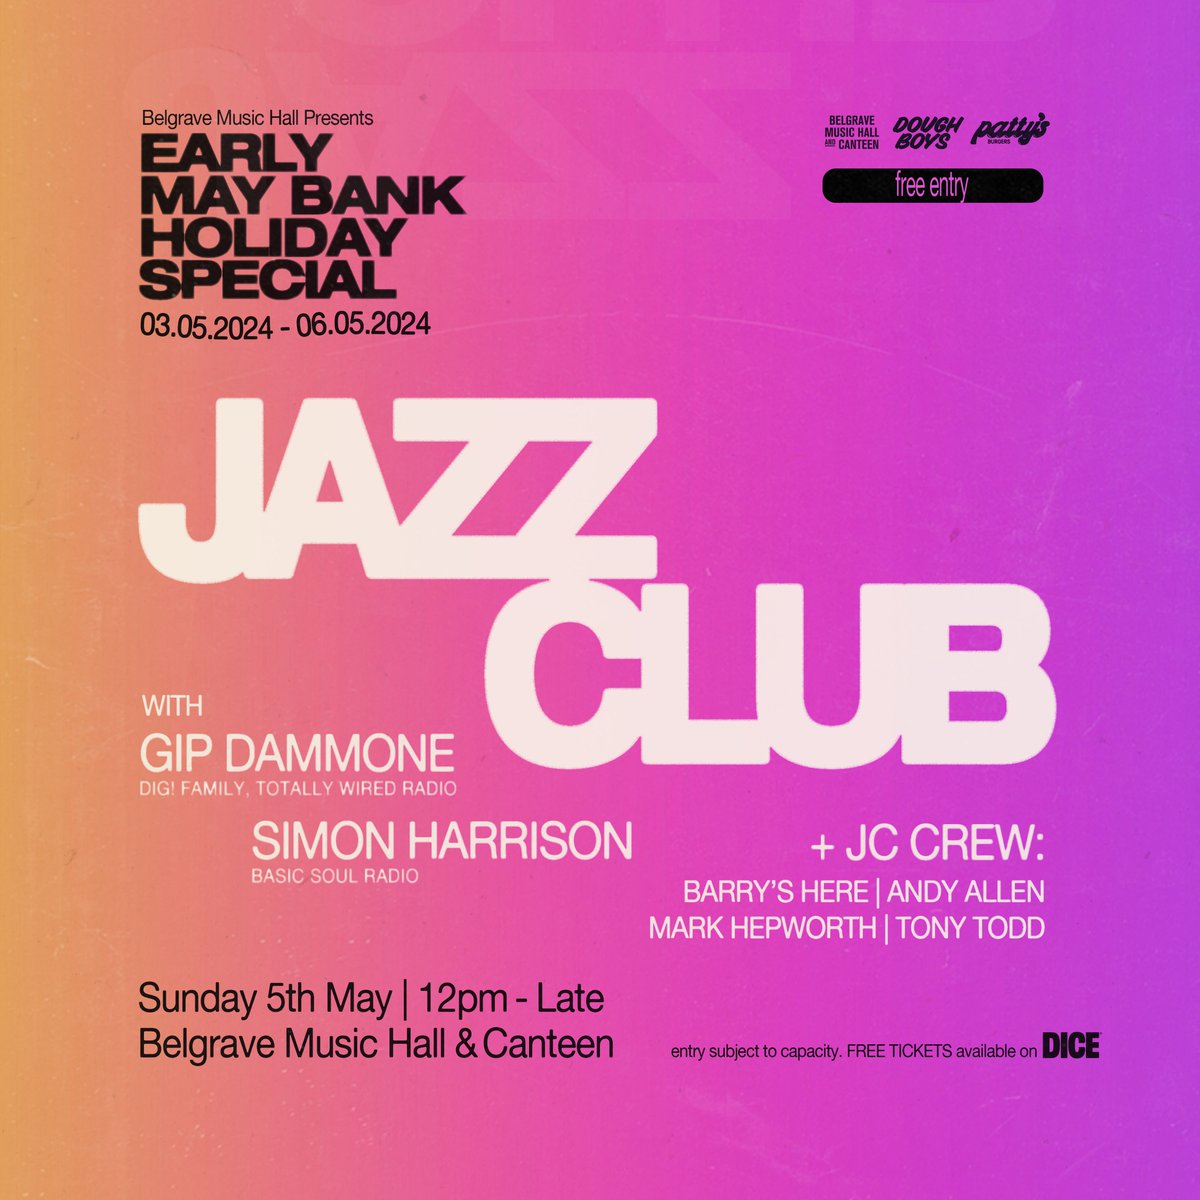 dice.fm/event/2nom7-ja… Bank holiday Sunday brings Jazz Club to the Canteen with Gip Dammone and Simon Harrison soundtracking your afternoon. Joining them on support duties, Barry's Here, Andy Allen, Mark Hepworth and Tony Todd 🫡 FREE ENTRY